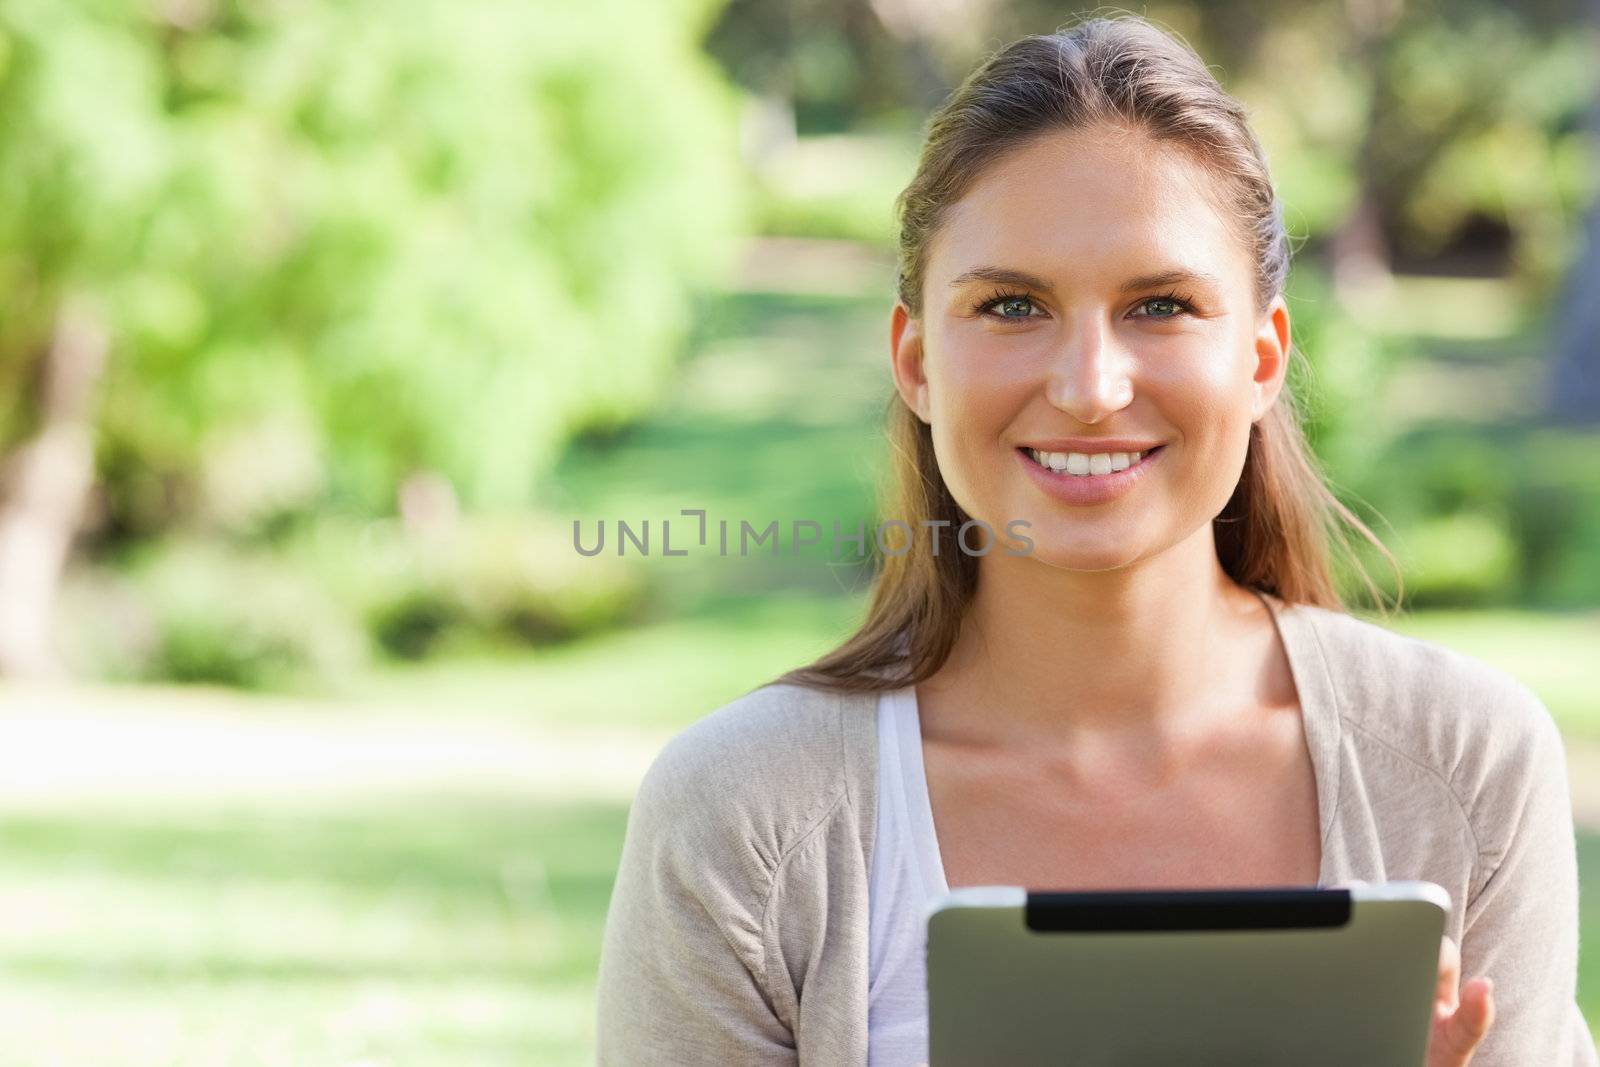 Smiling young woman sitting on the lawn with a tablet computer